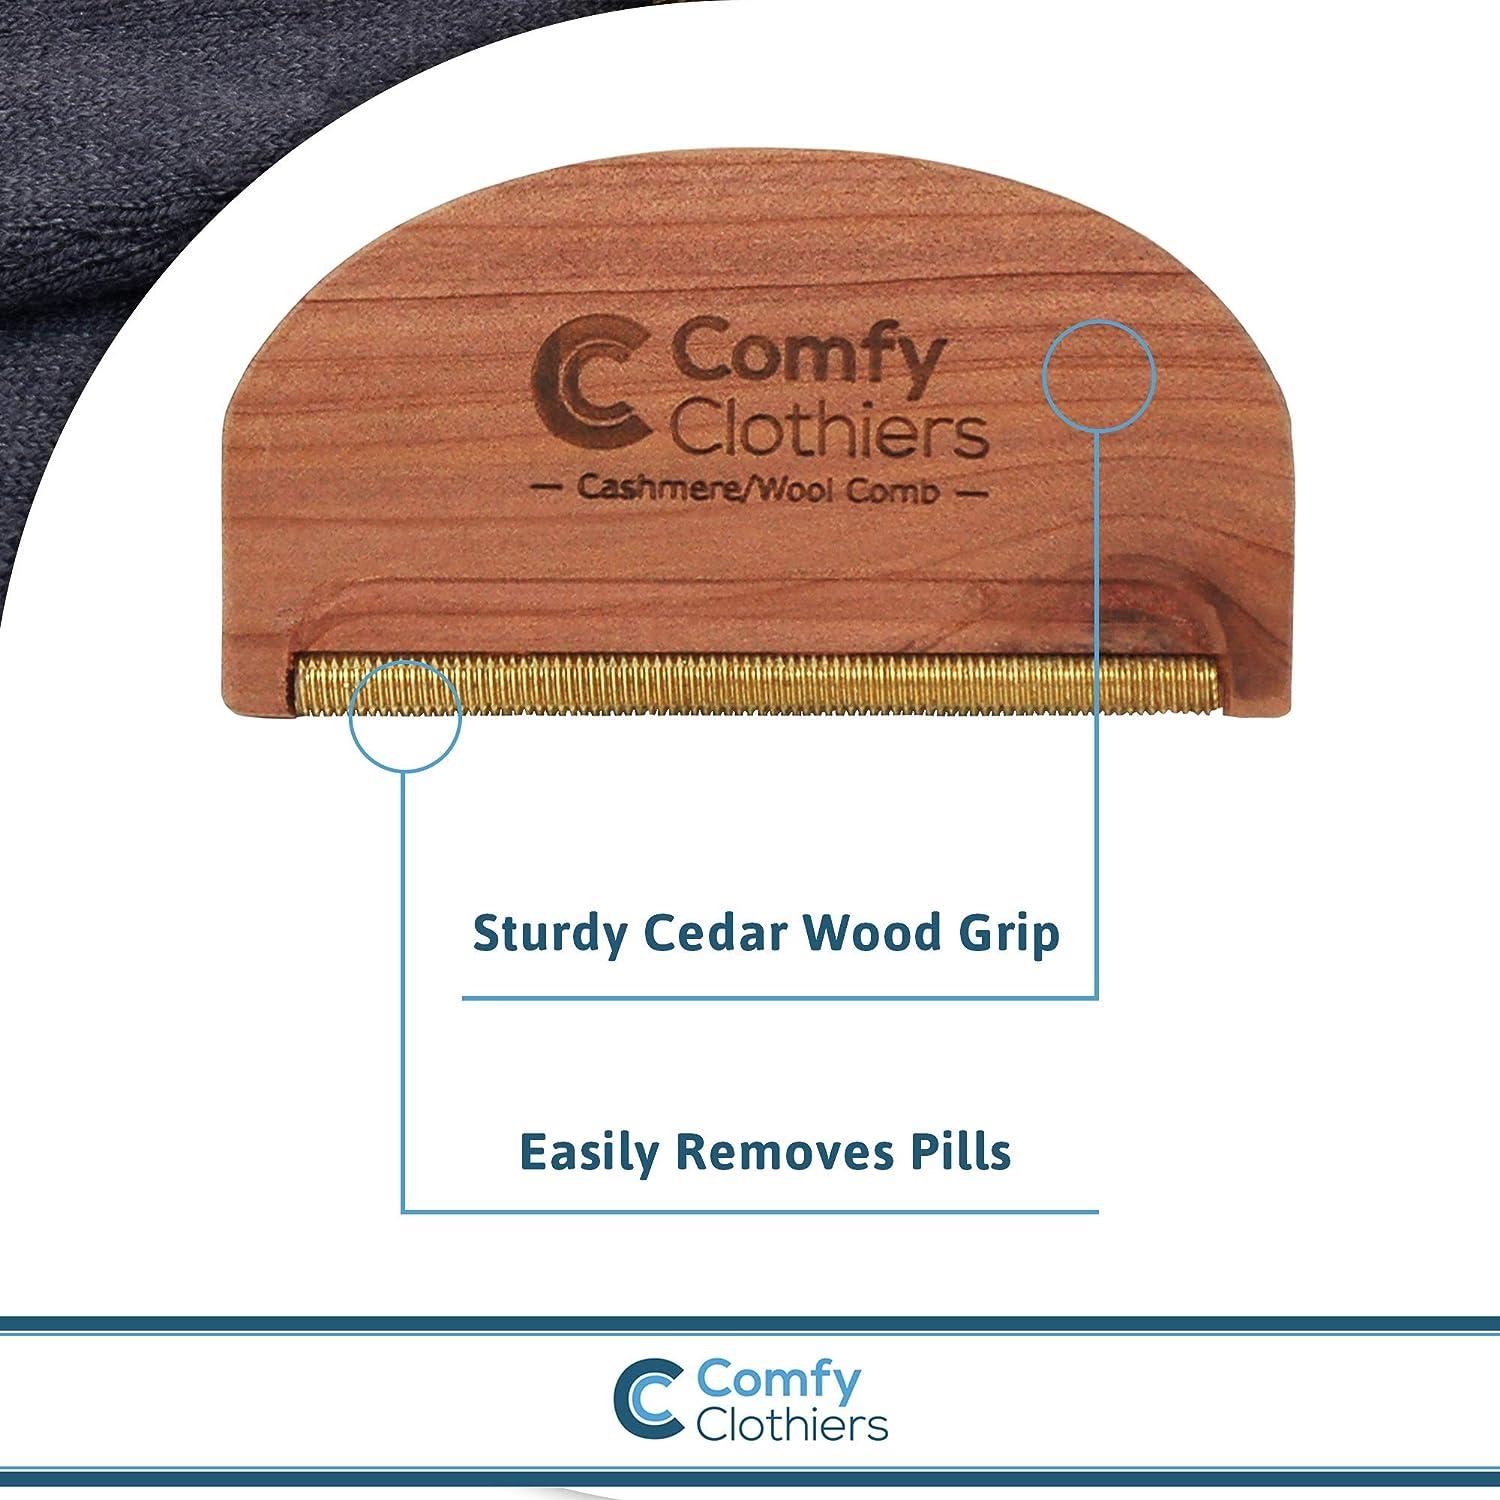 Comfy Clothiers - Multi-Fabric Cedar Wood Sweater Comb for De-Pilling  Cashmere, Wool & Other Fabrics - Defuzzing and Lint Removal to Refresh Your  Clothes - Sweater Pilling Remover